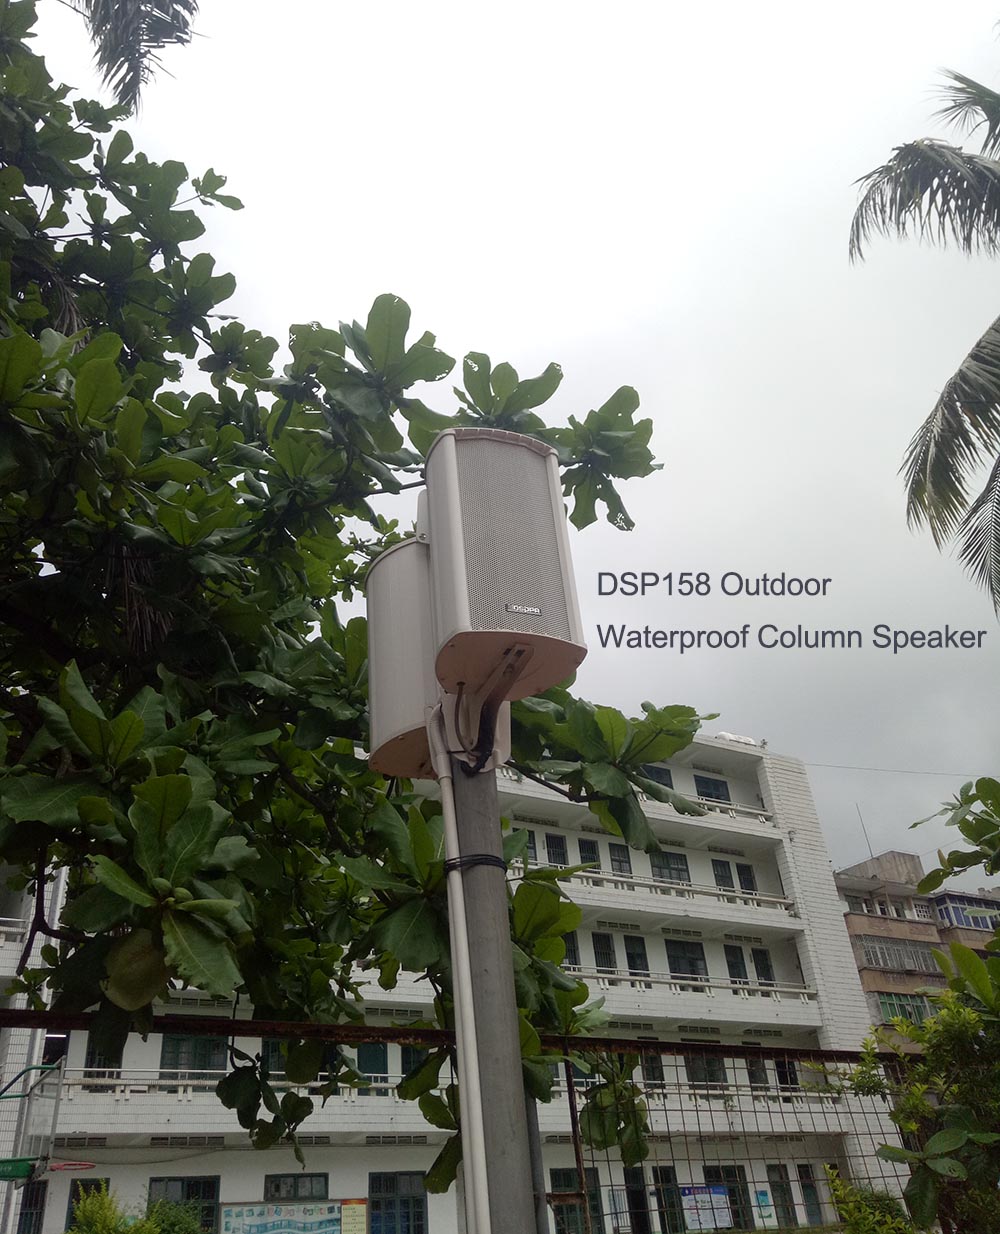 Photos of DSPPA products installed in the campus